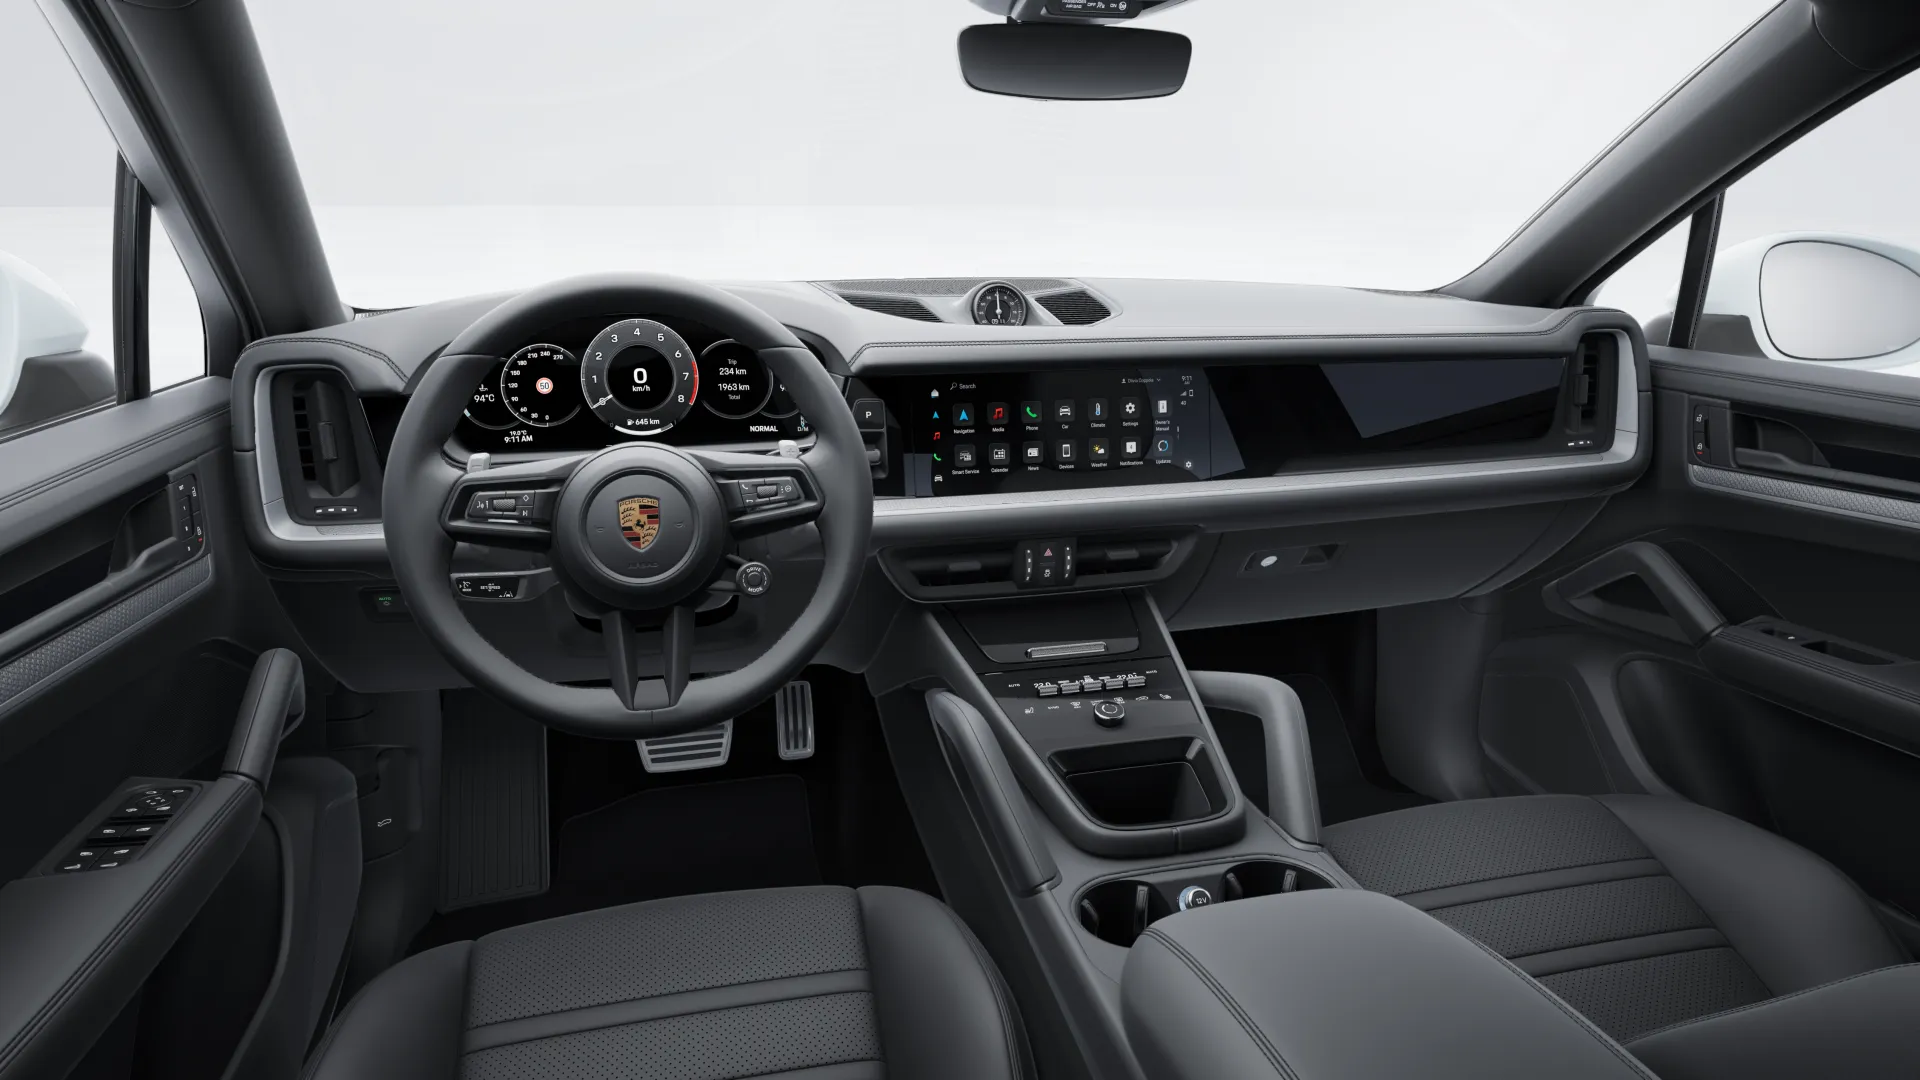 Interior view of Cayenne S Coupé